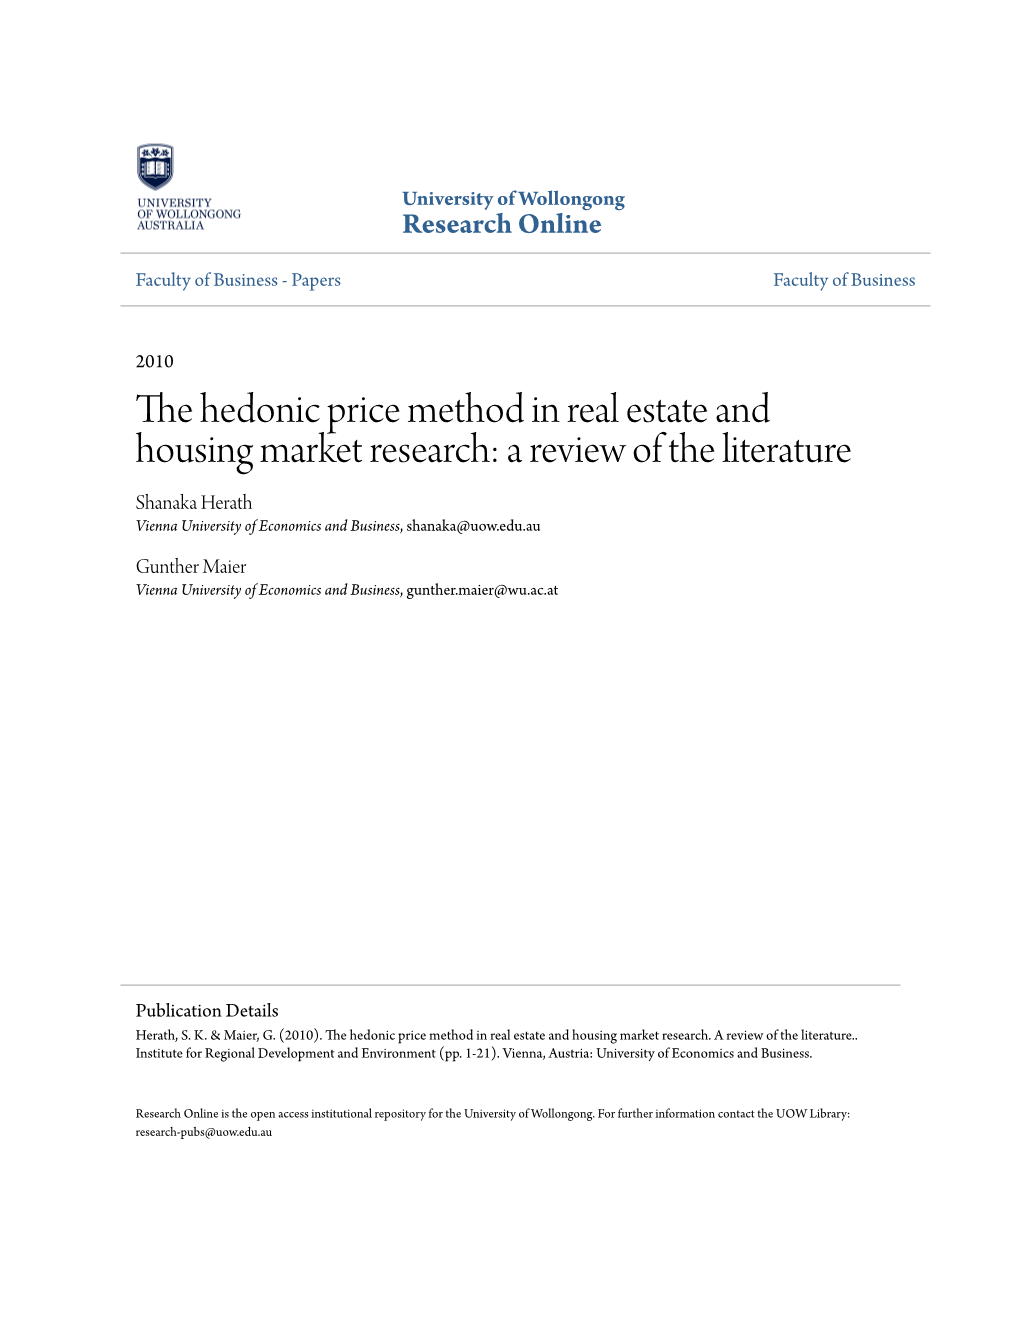 The Hedonic Price Method in Real Estate and Housing Market Research